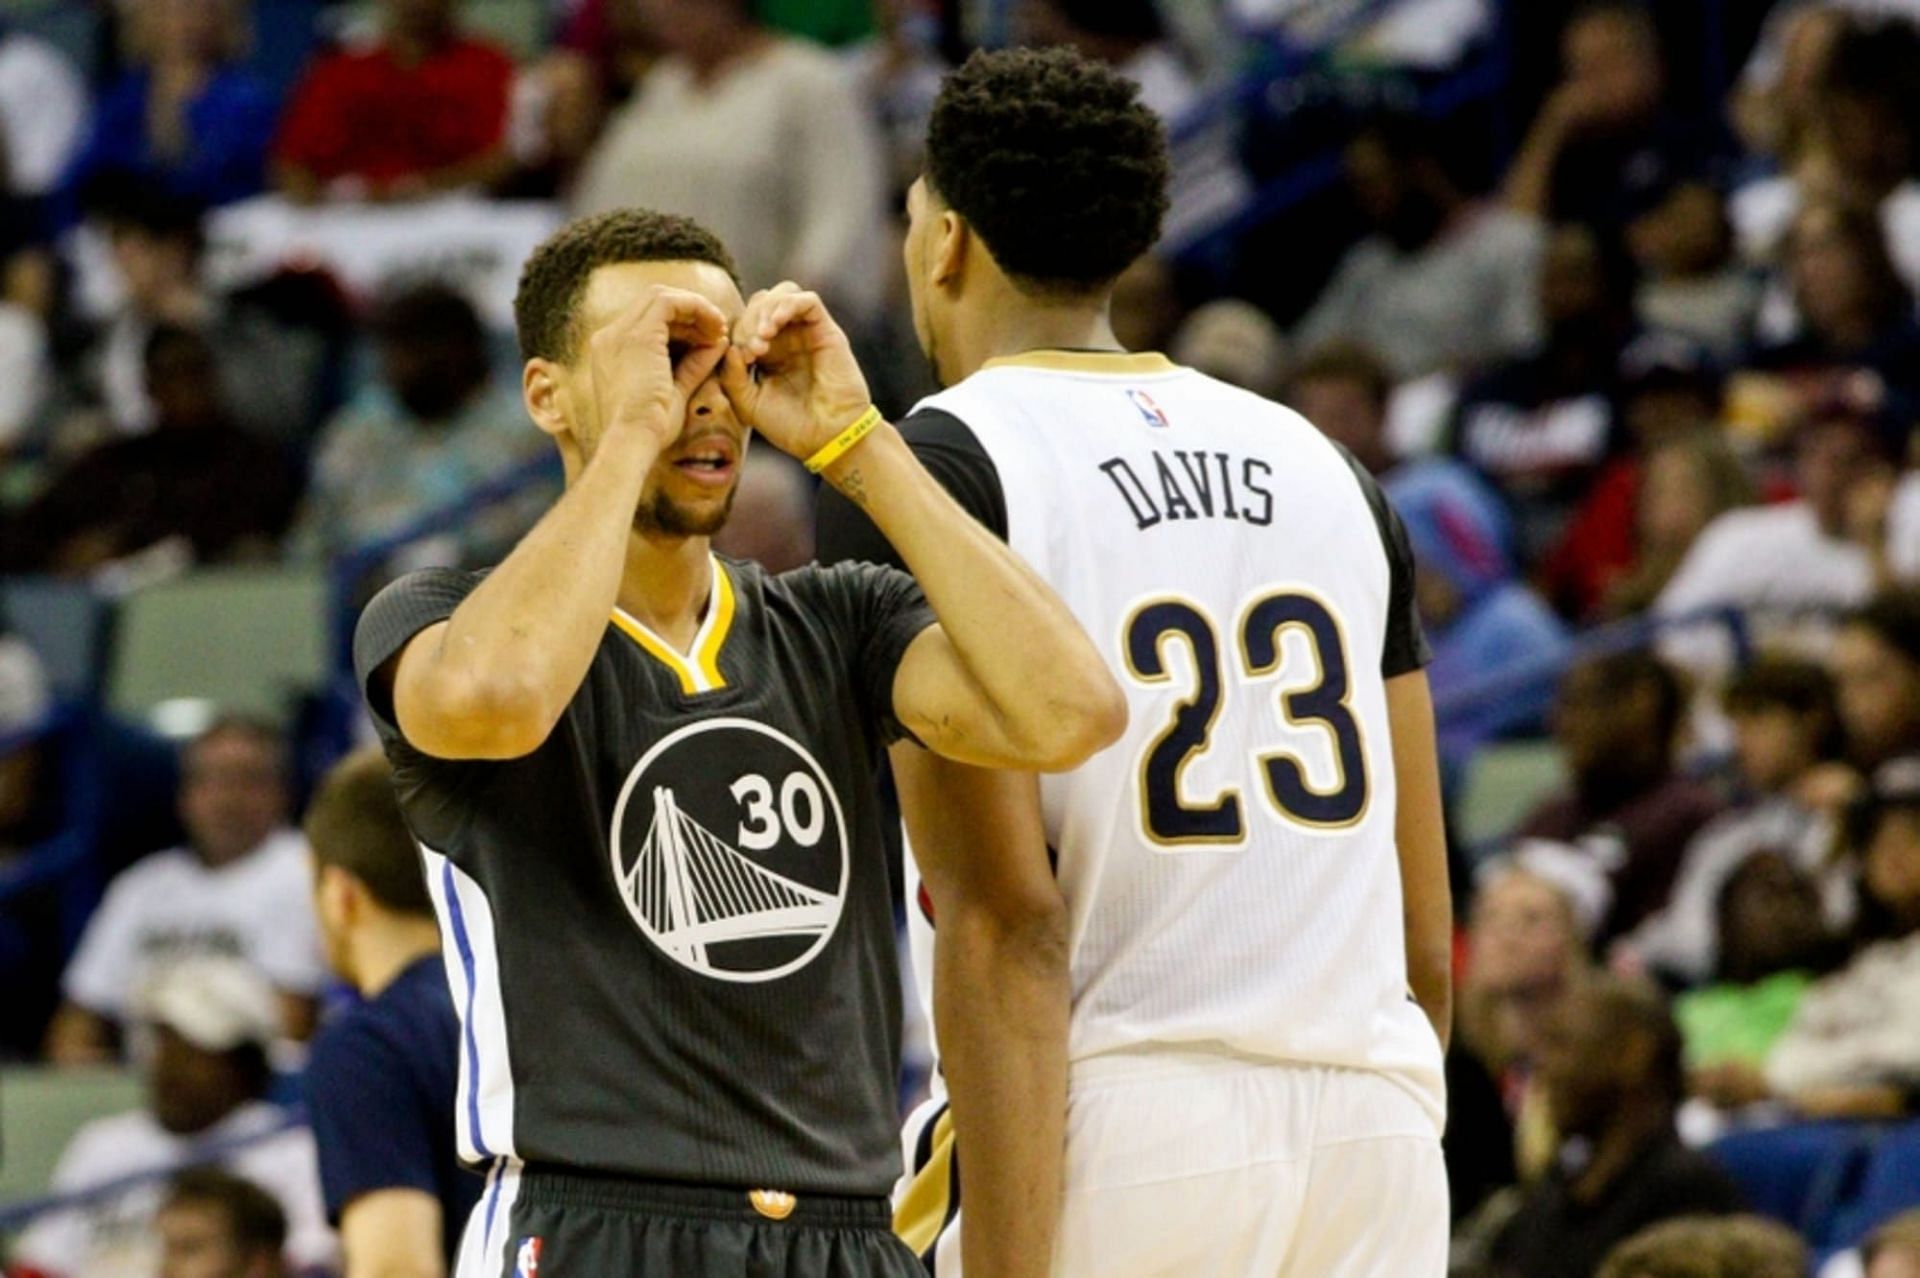 Stephen Curry scored 53 points against the New Orleans Pelicans in 2015